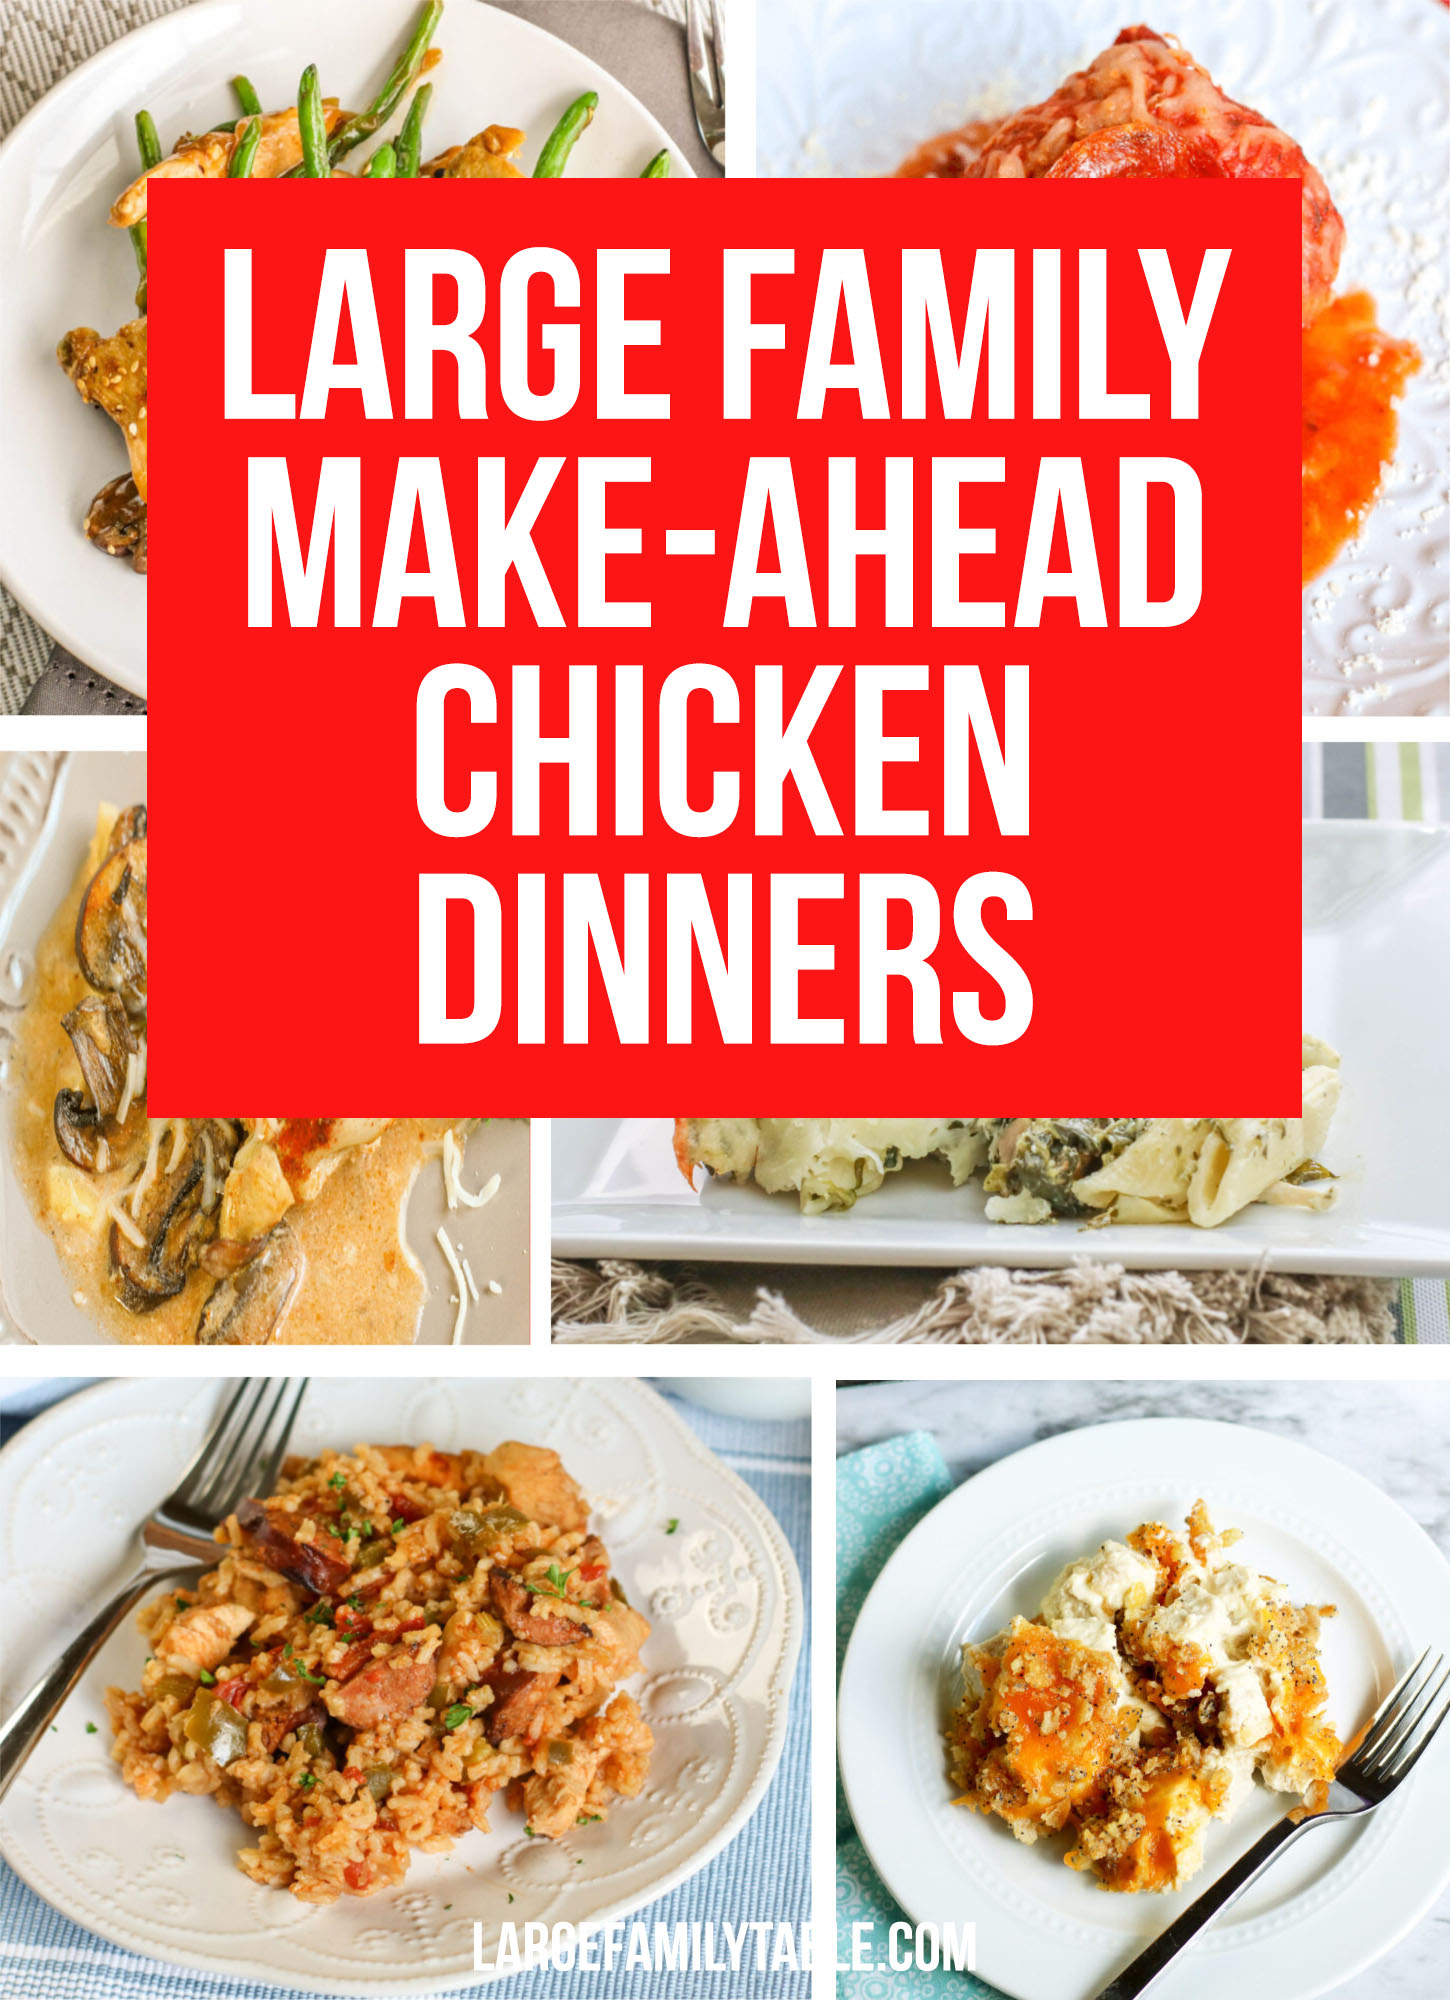 Large Family Make-Ahead Chicken Dinners!